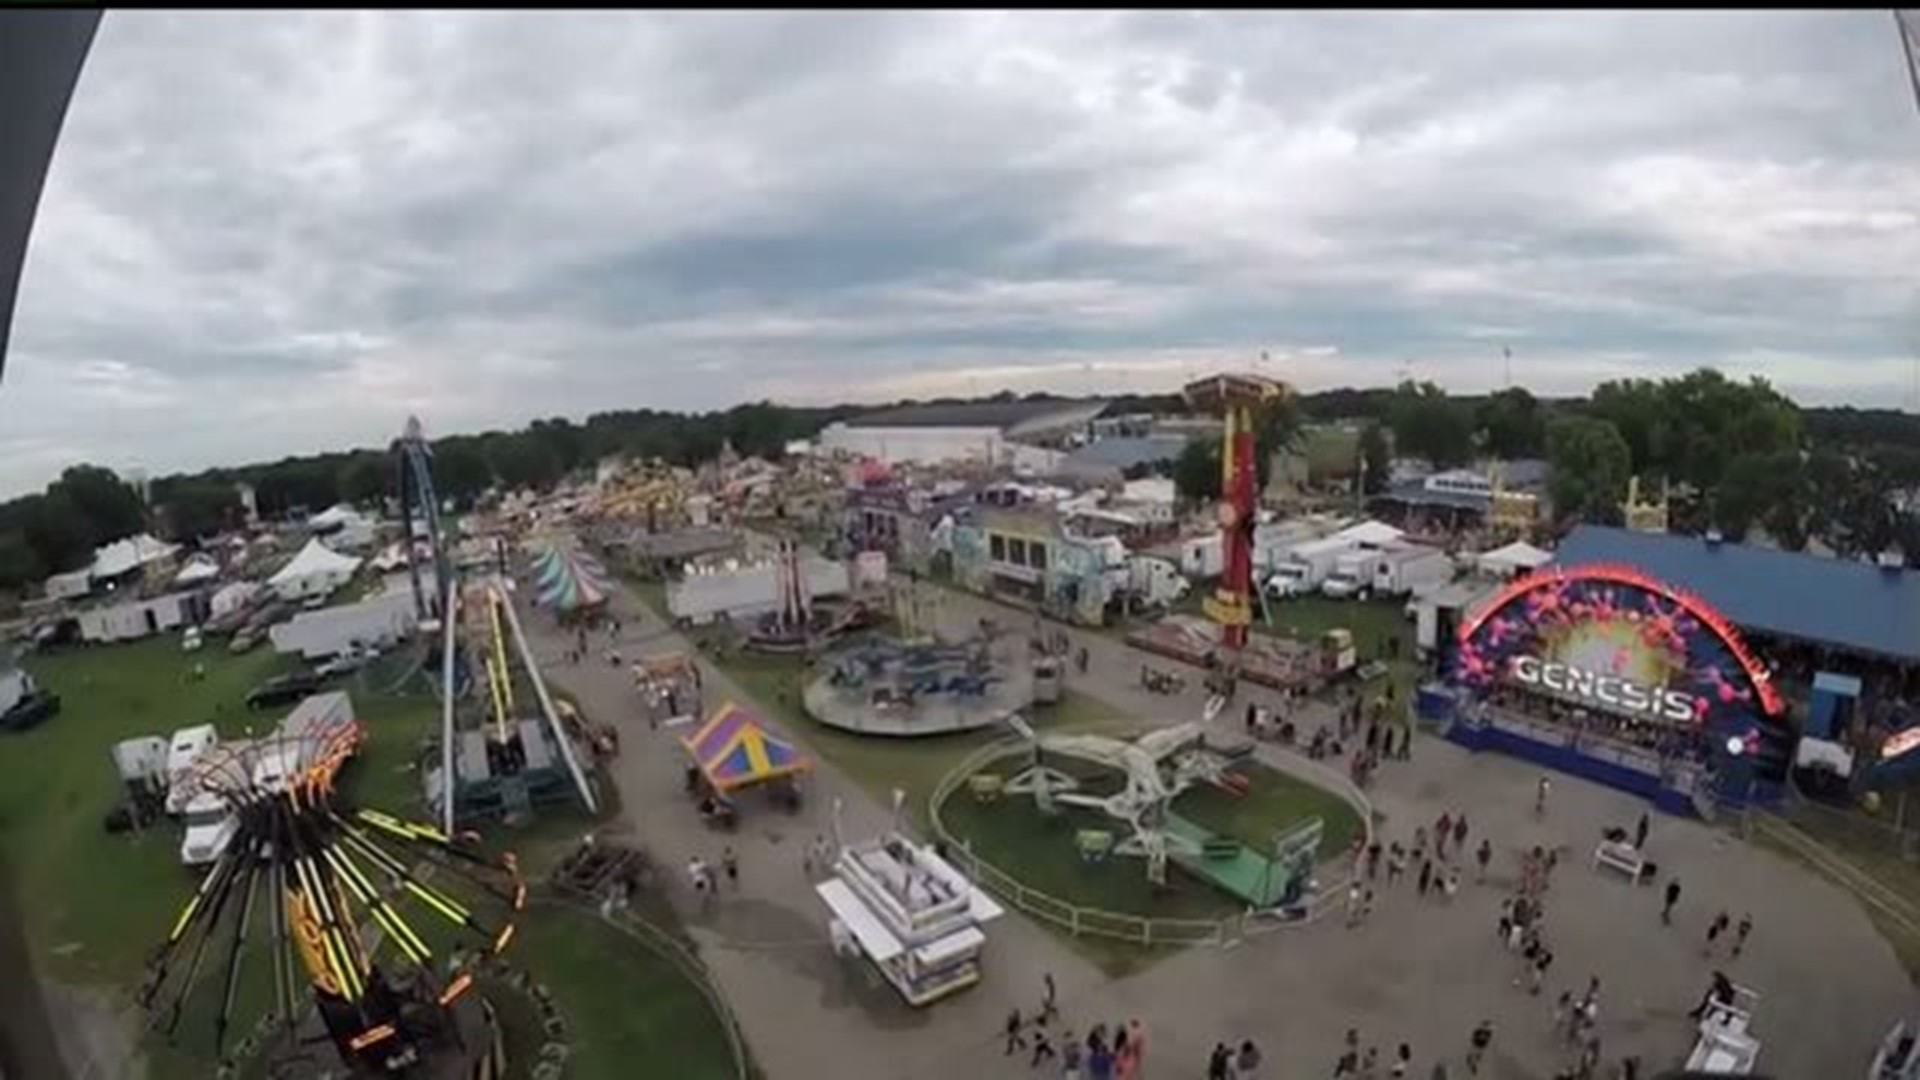 Rides and music fill final day of the Mississippi Valley Fair